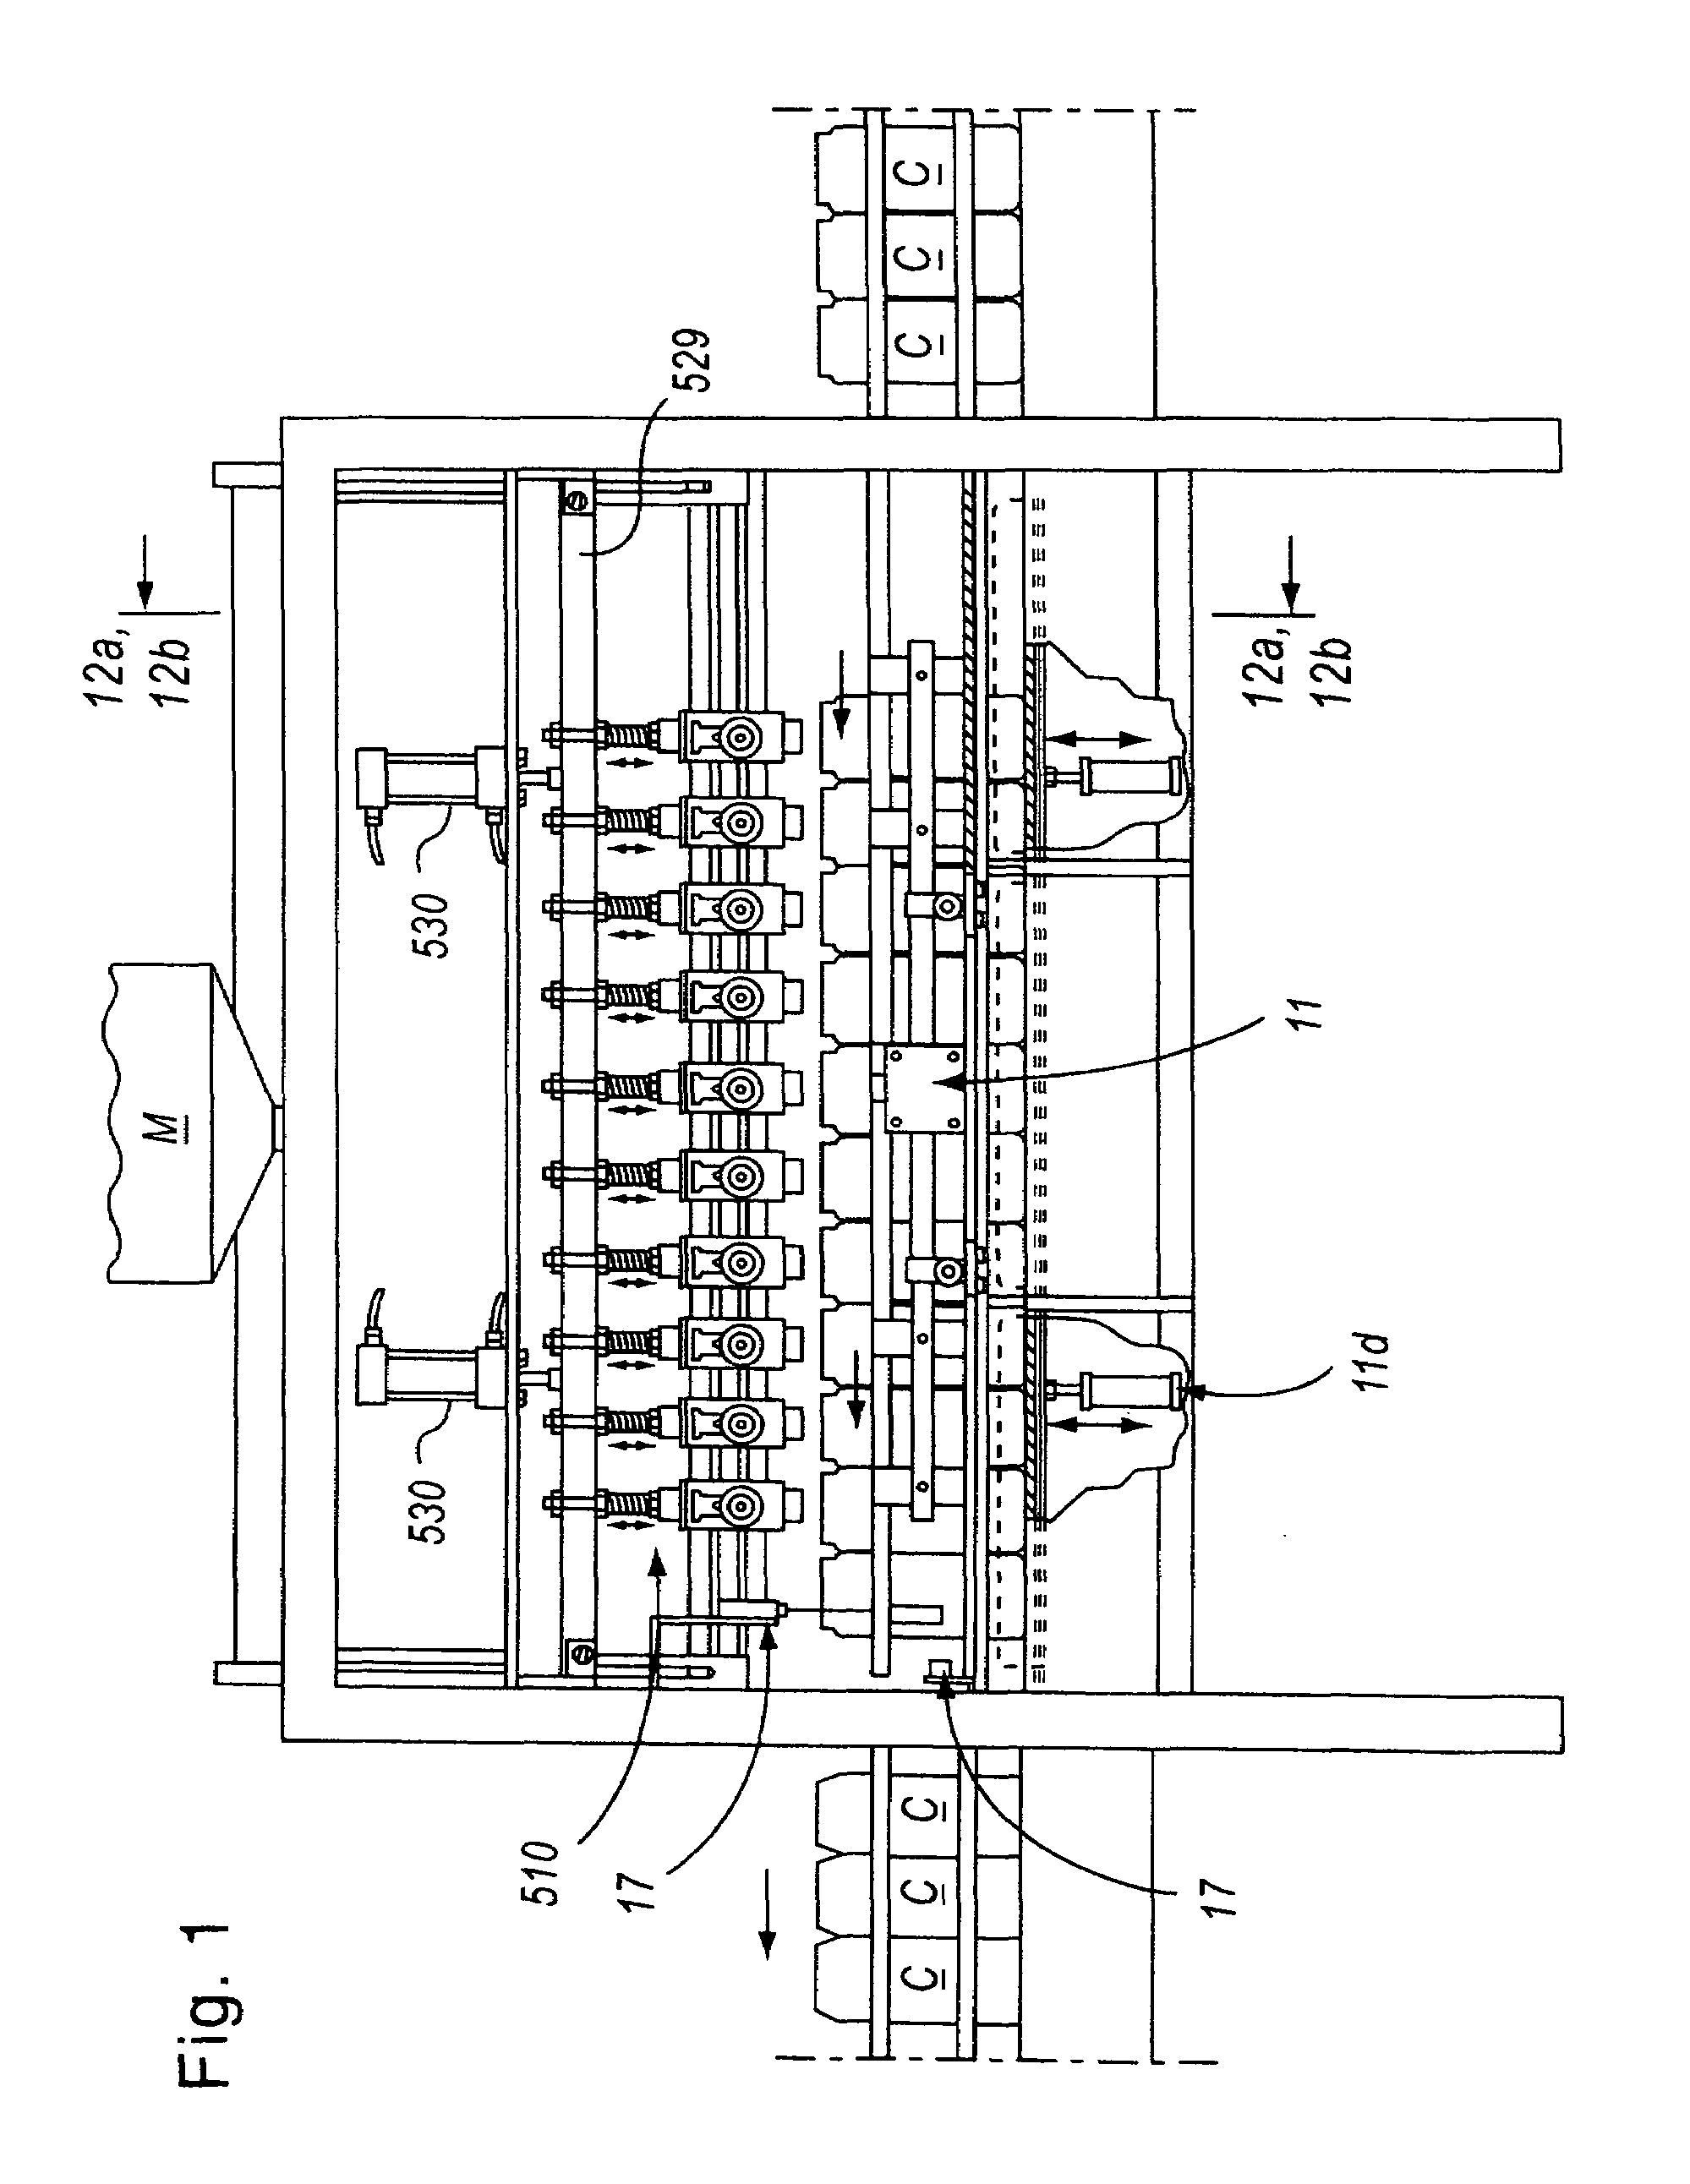 Apparatus for the simultaneous filling of precise amounts of viscous liquid material in a sanitary environment